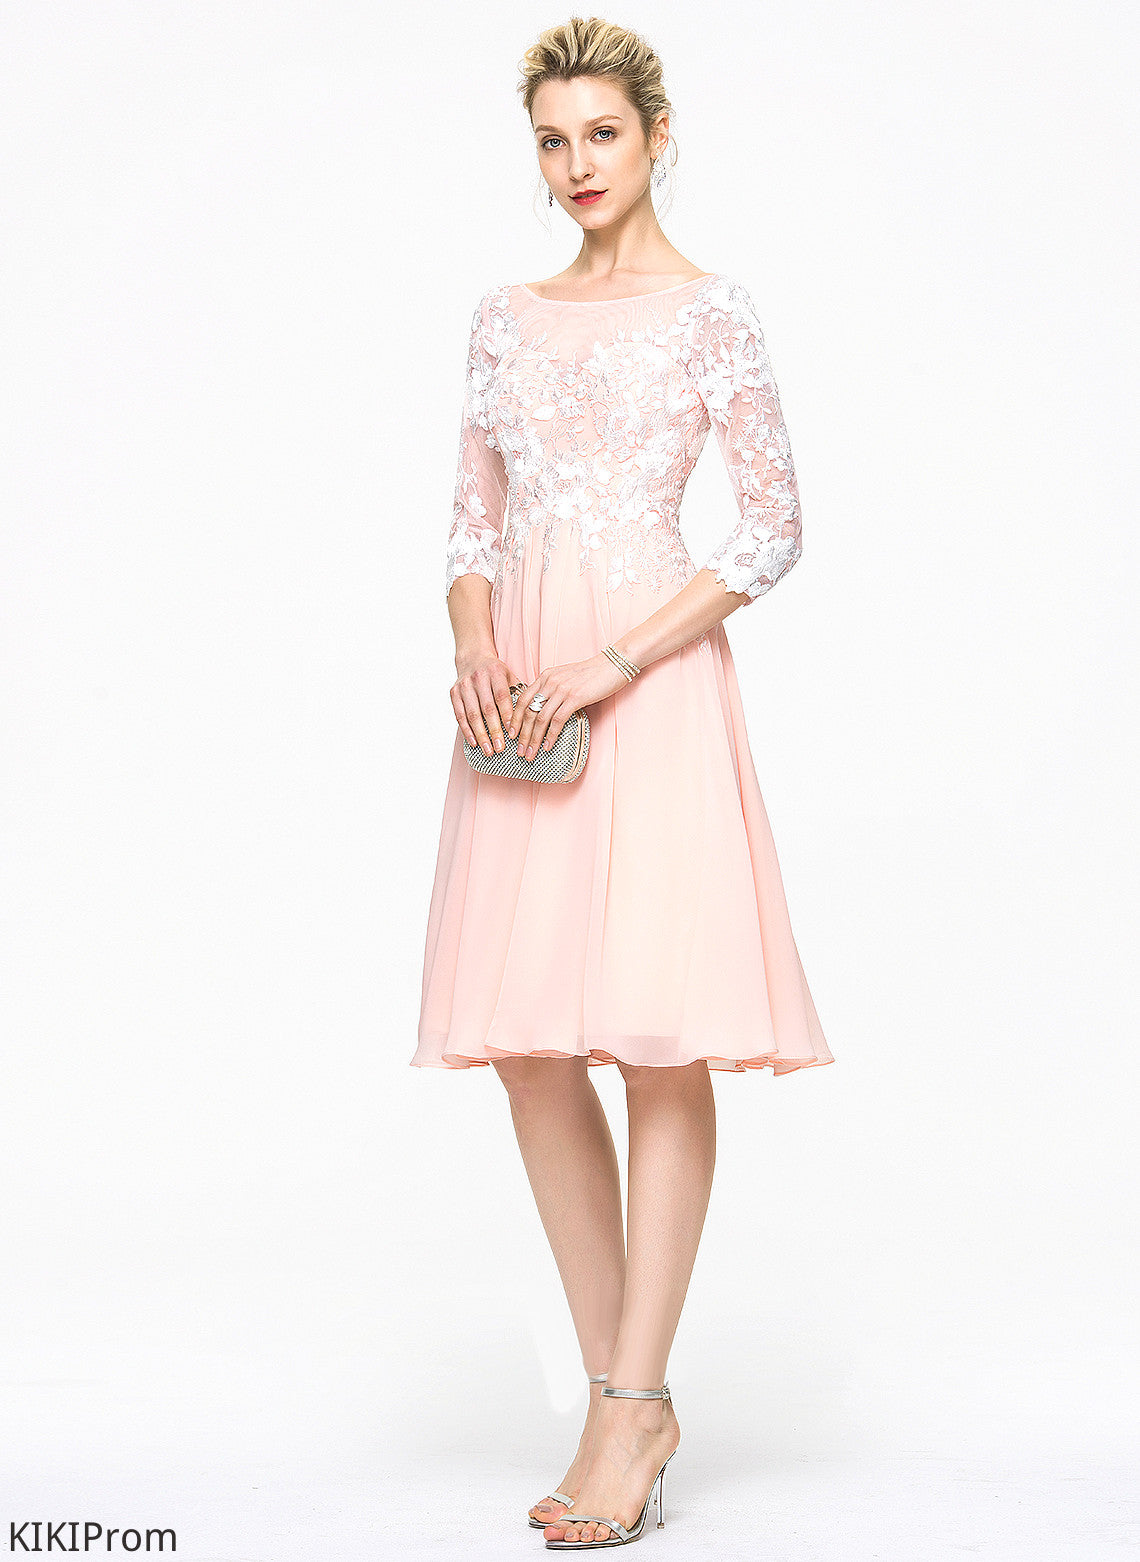 Scoop Homecoming A-Line Dress With Chiffon Callie Neck Homecoming Dresses Lace Knee-Length